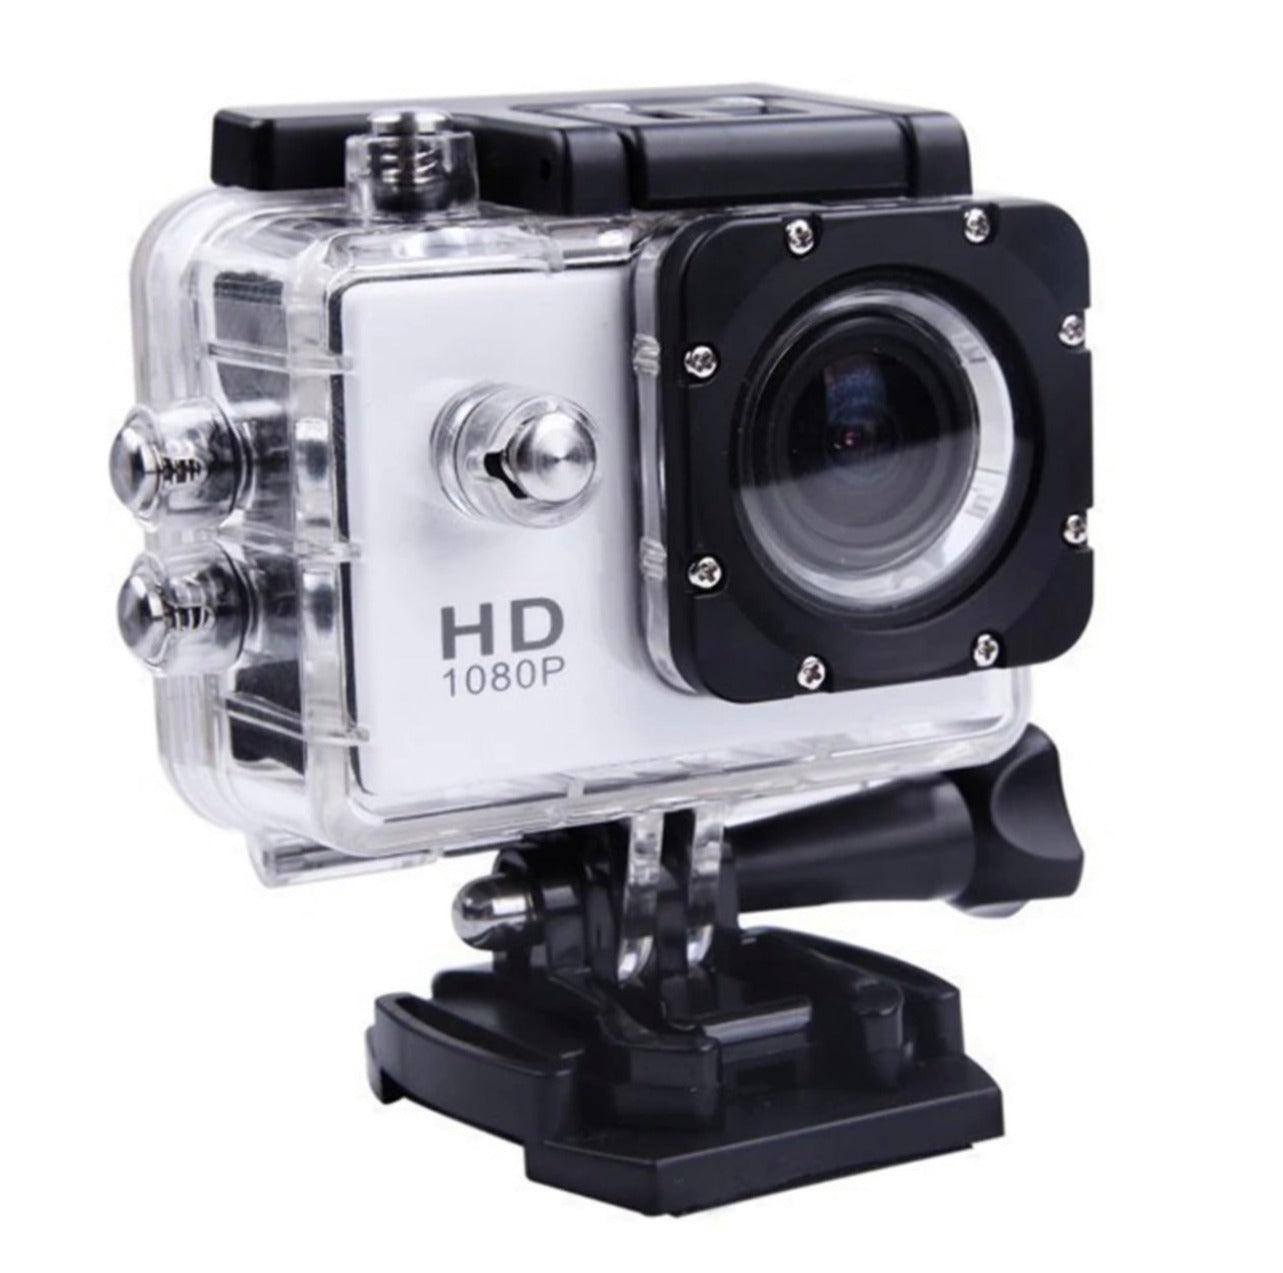 Underwater Action Camera - Expat Life Style